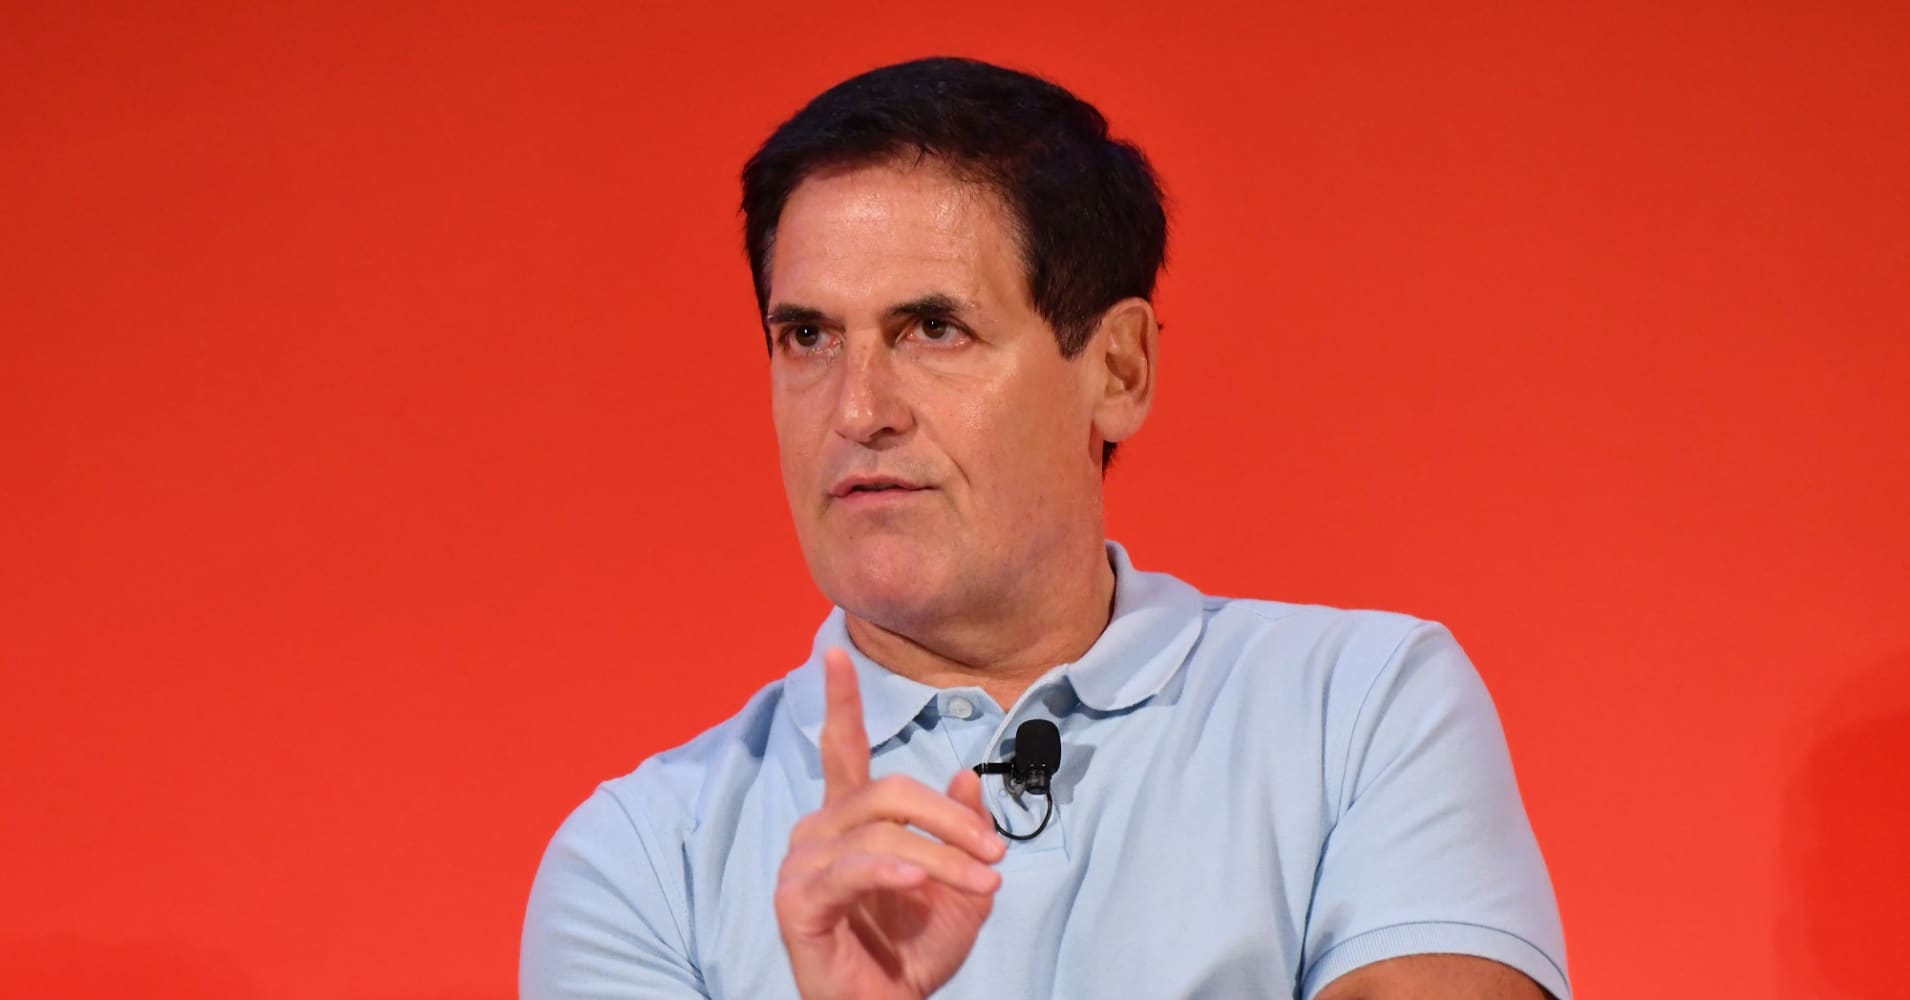 Mark Cuban says top employees share this key characteristic